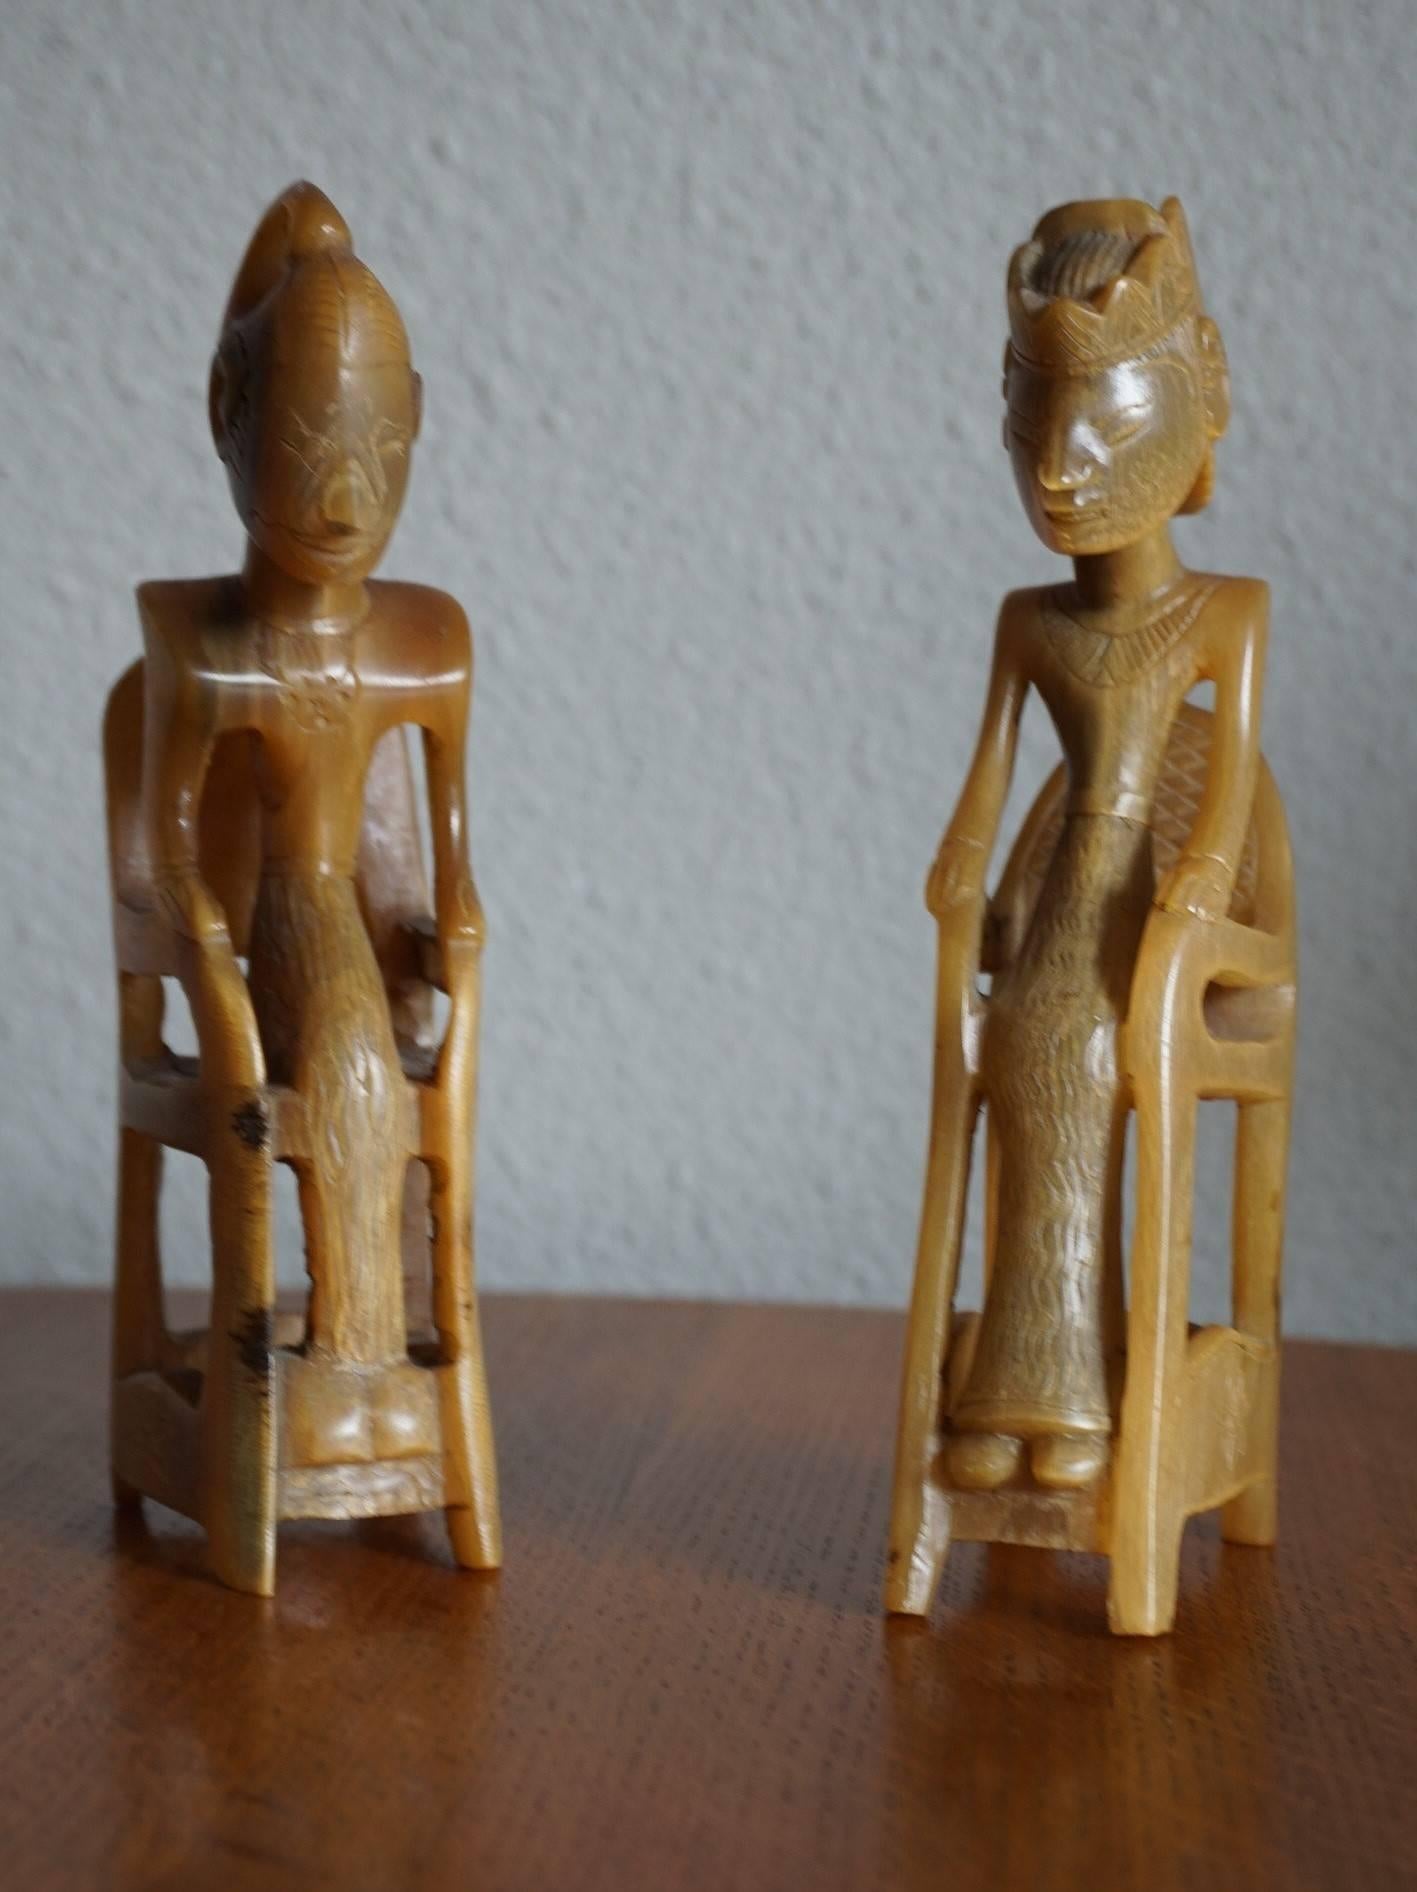 Indonesian Hand-Carved Out of Horn Wayang Dolls Sitting in Chairs Bali 6